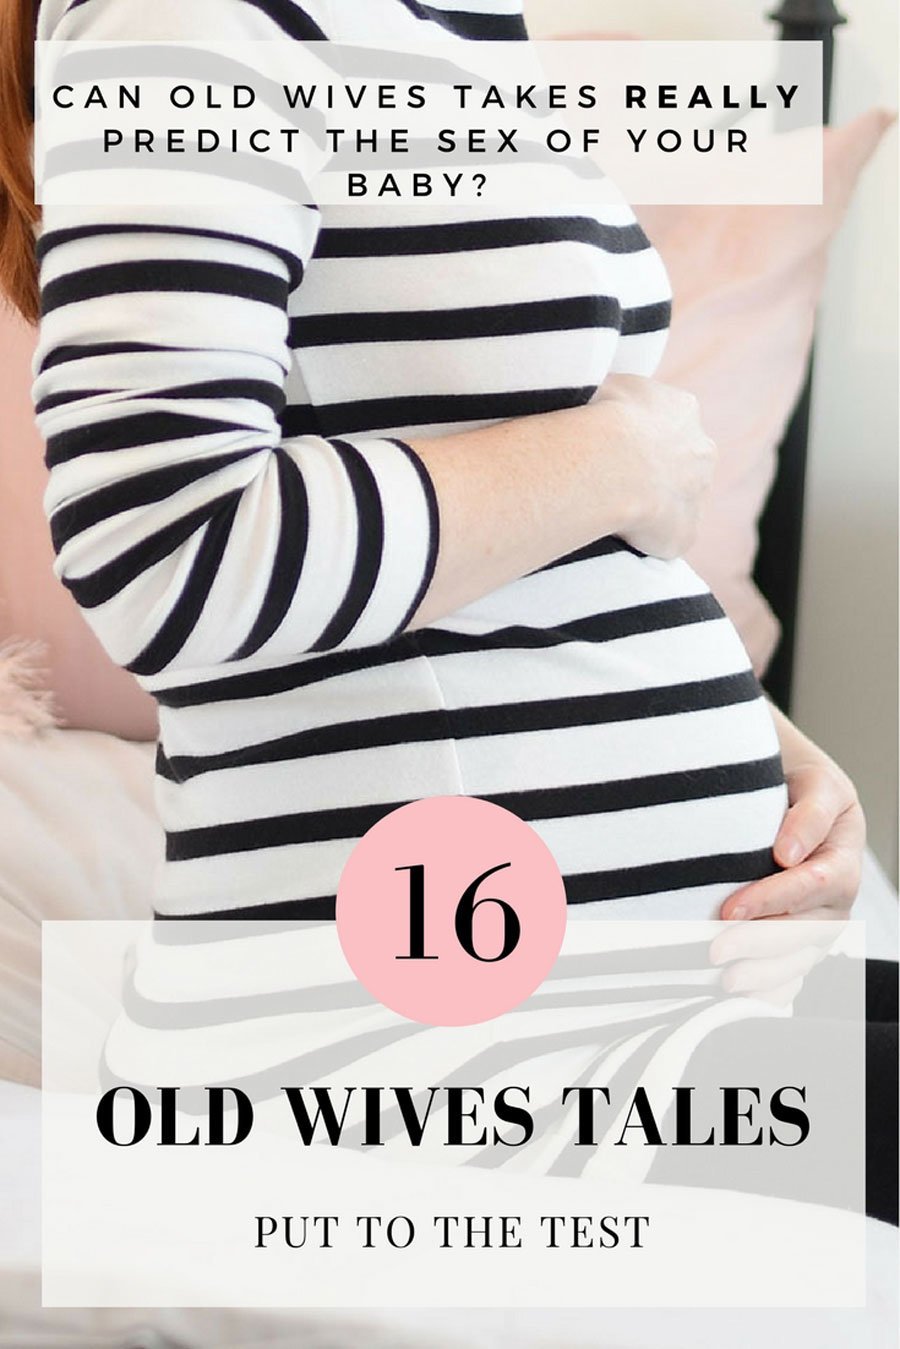 old wives tales about the sex Adult Pics Hq